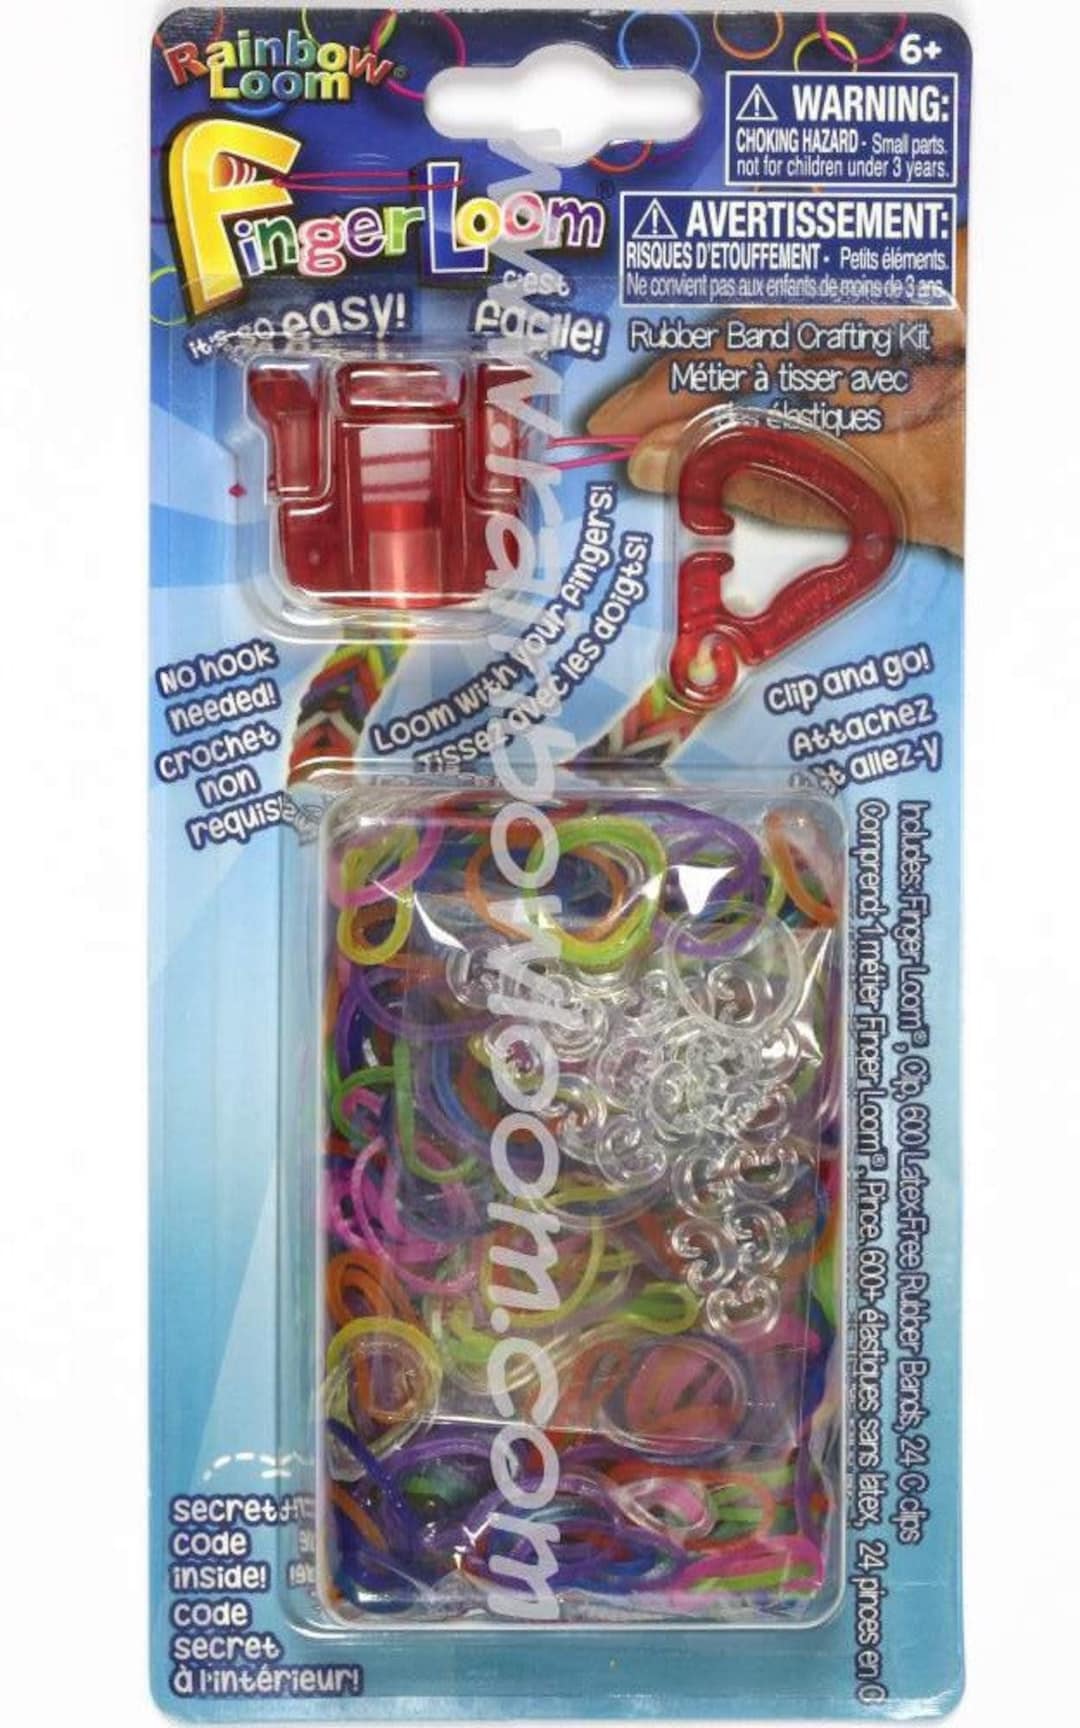 Rainbow Loom 300 Ct. Sillicone Rubber Band Metallic Purple Refill Pack [12  C-Clips]